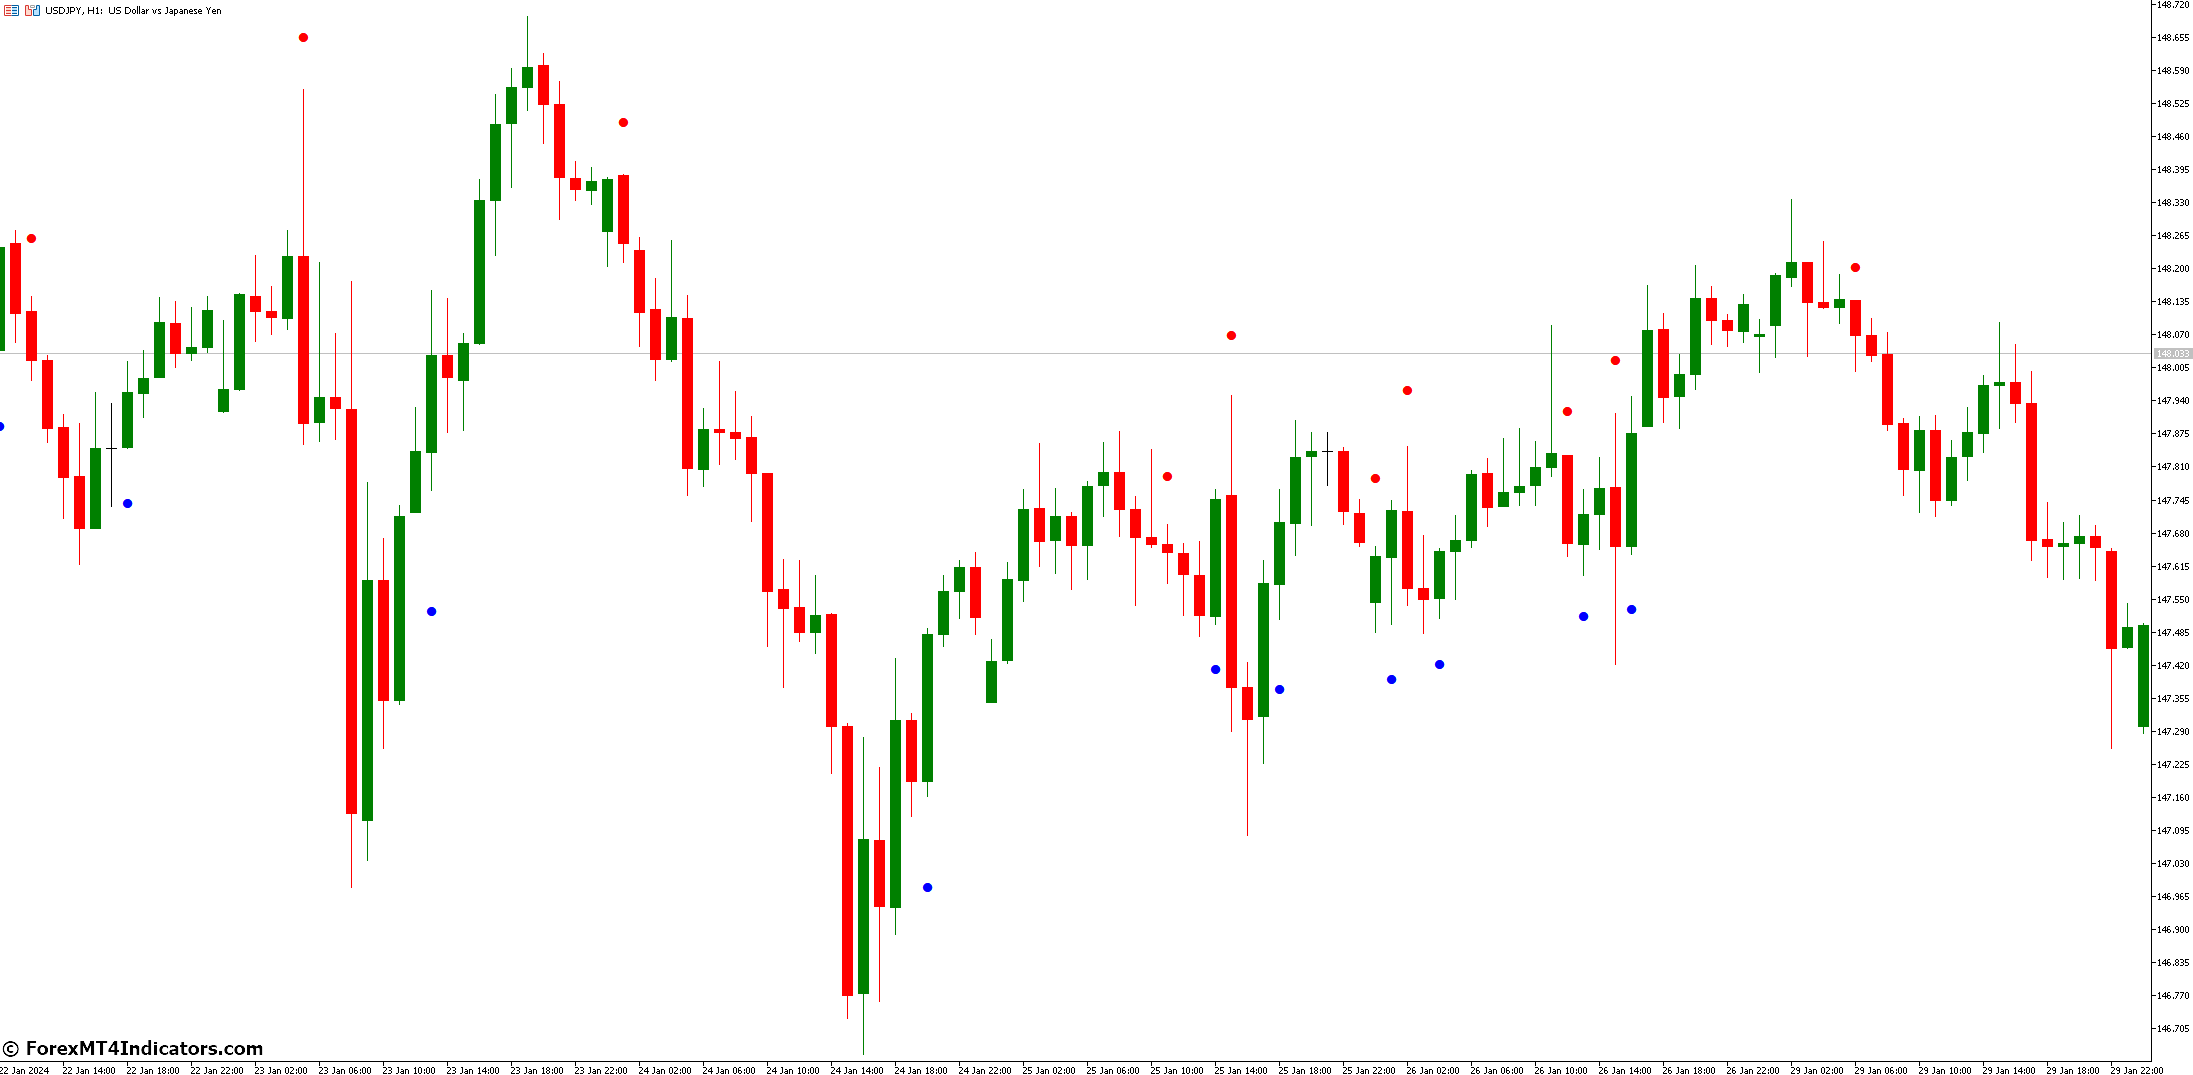 Overview Of The Cci Arrows Indicator